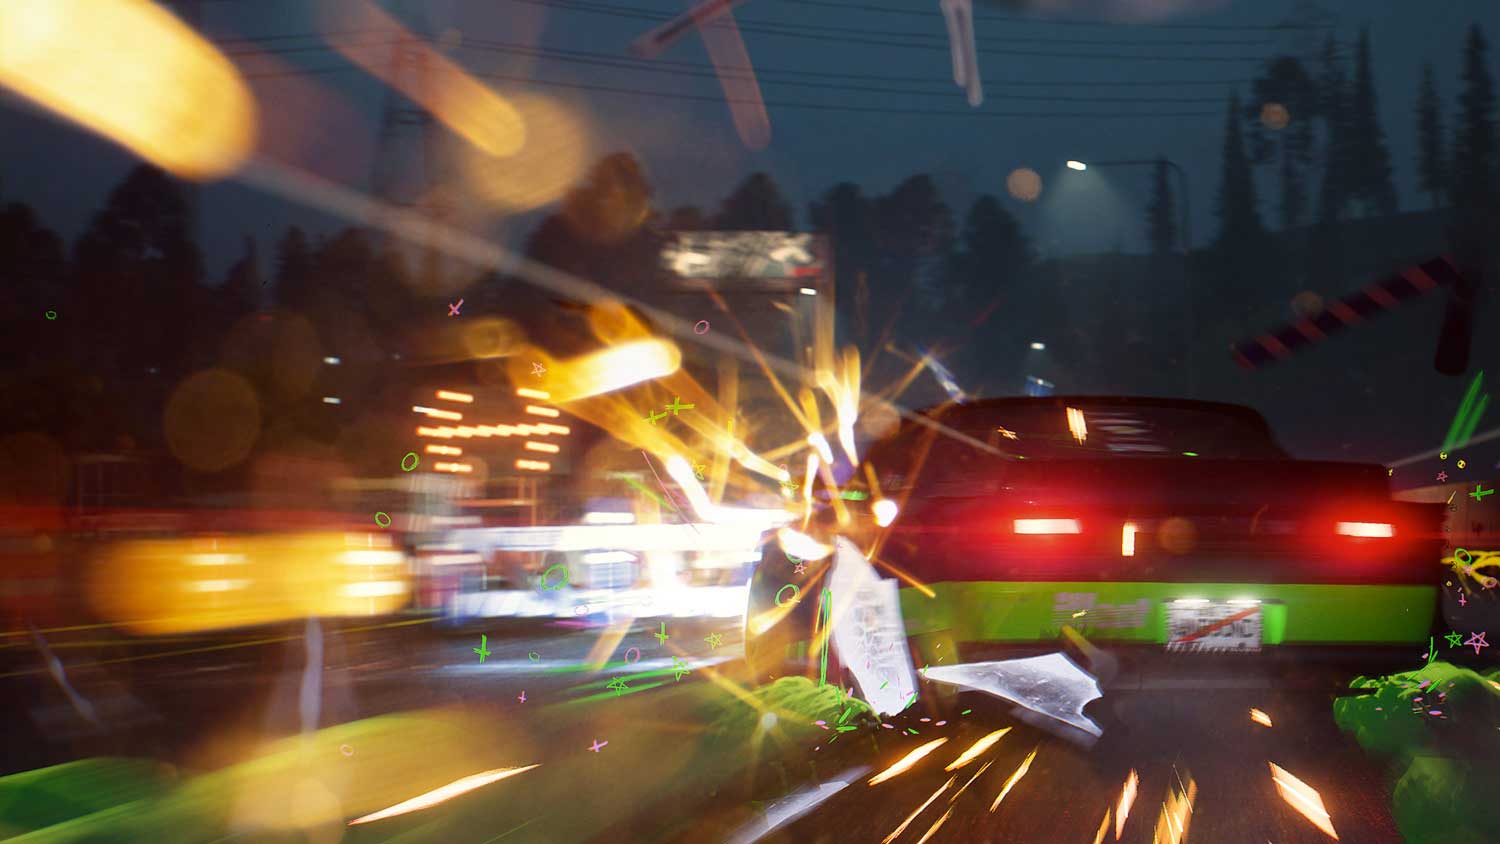 Need for Speed Unbound gets reveal trailer and December release